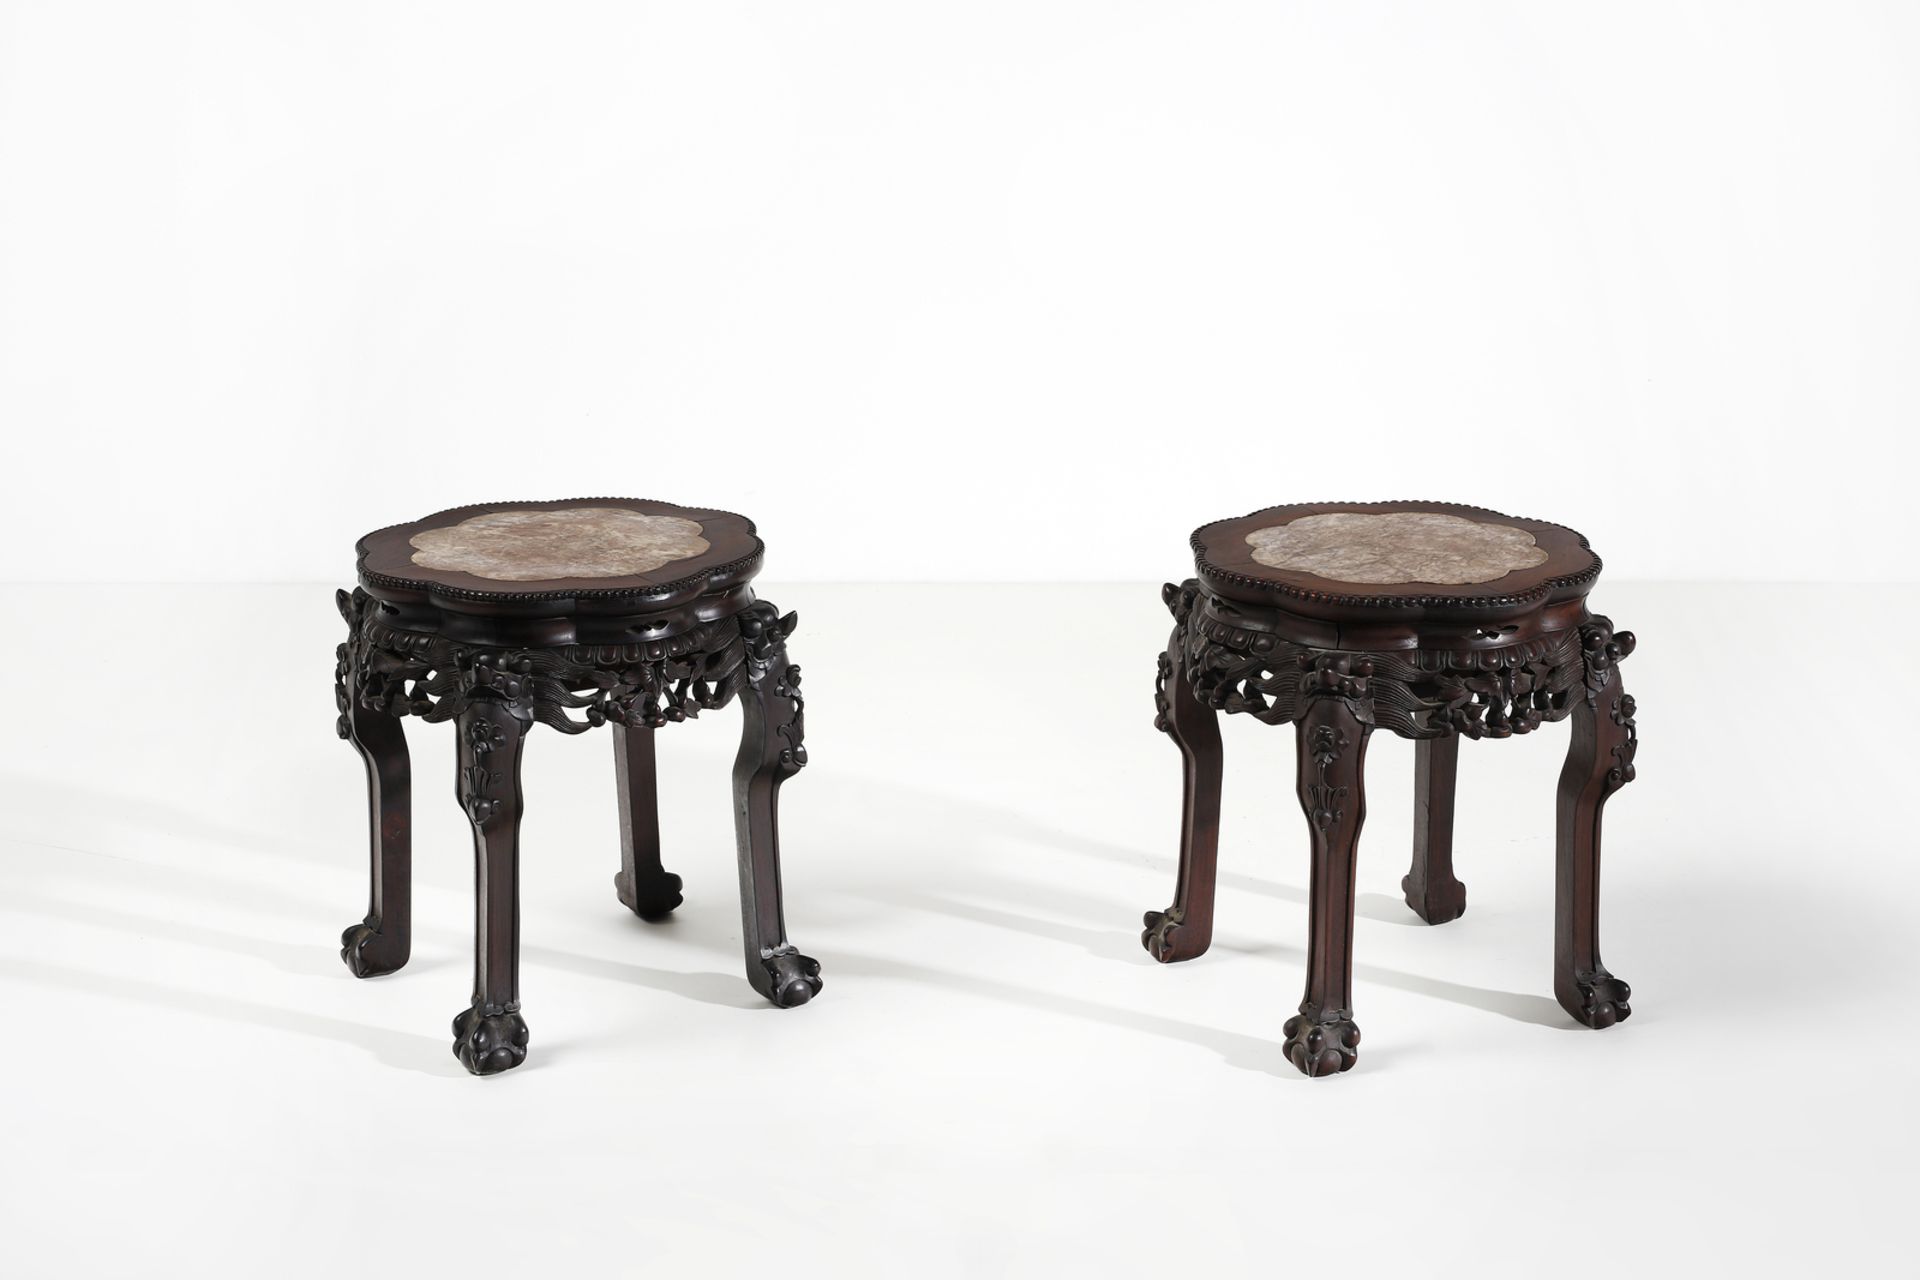 Arte Cinese A pair of wooden stools with pink marble top China, Qing dynasty, 19th century .